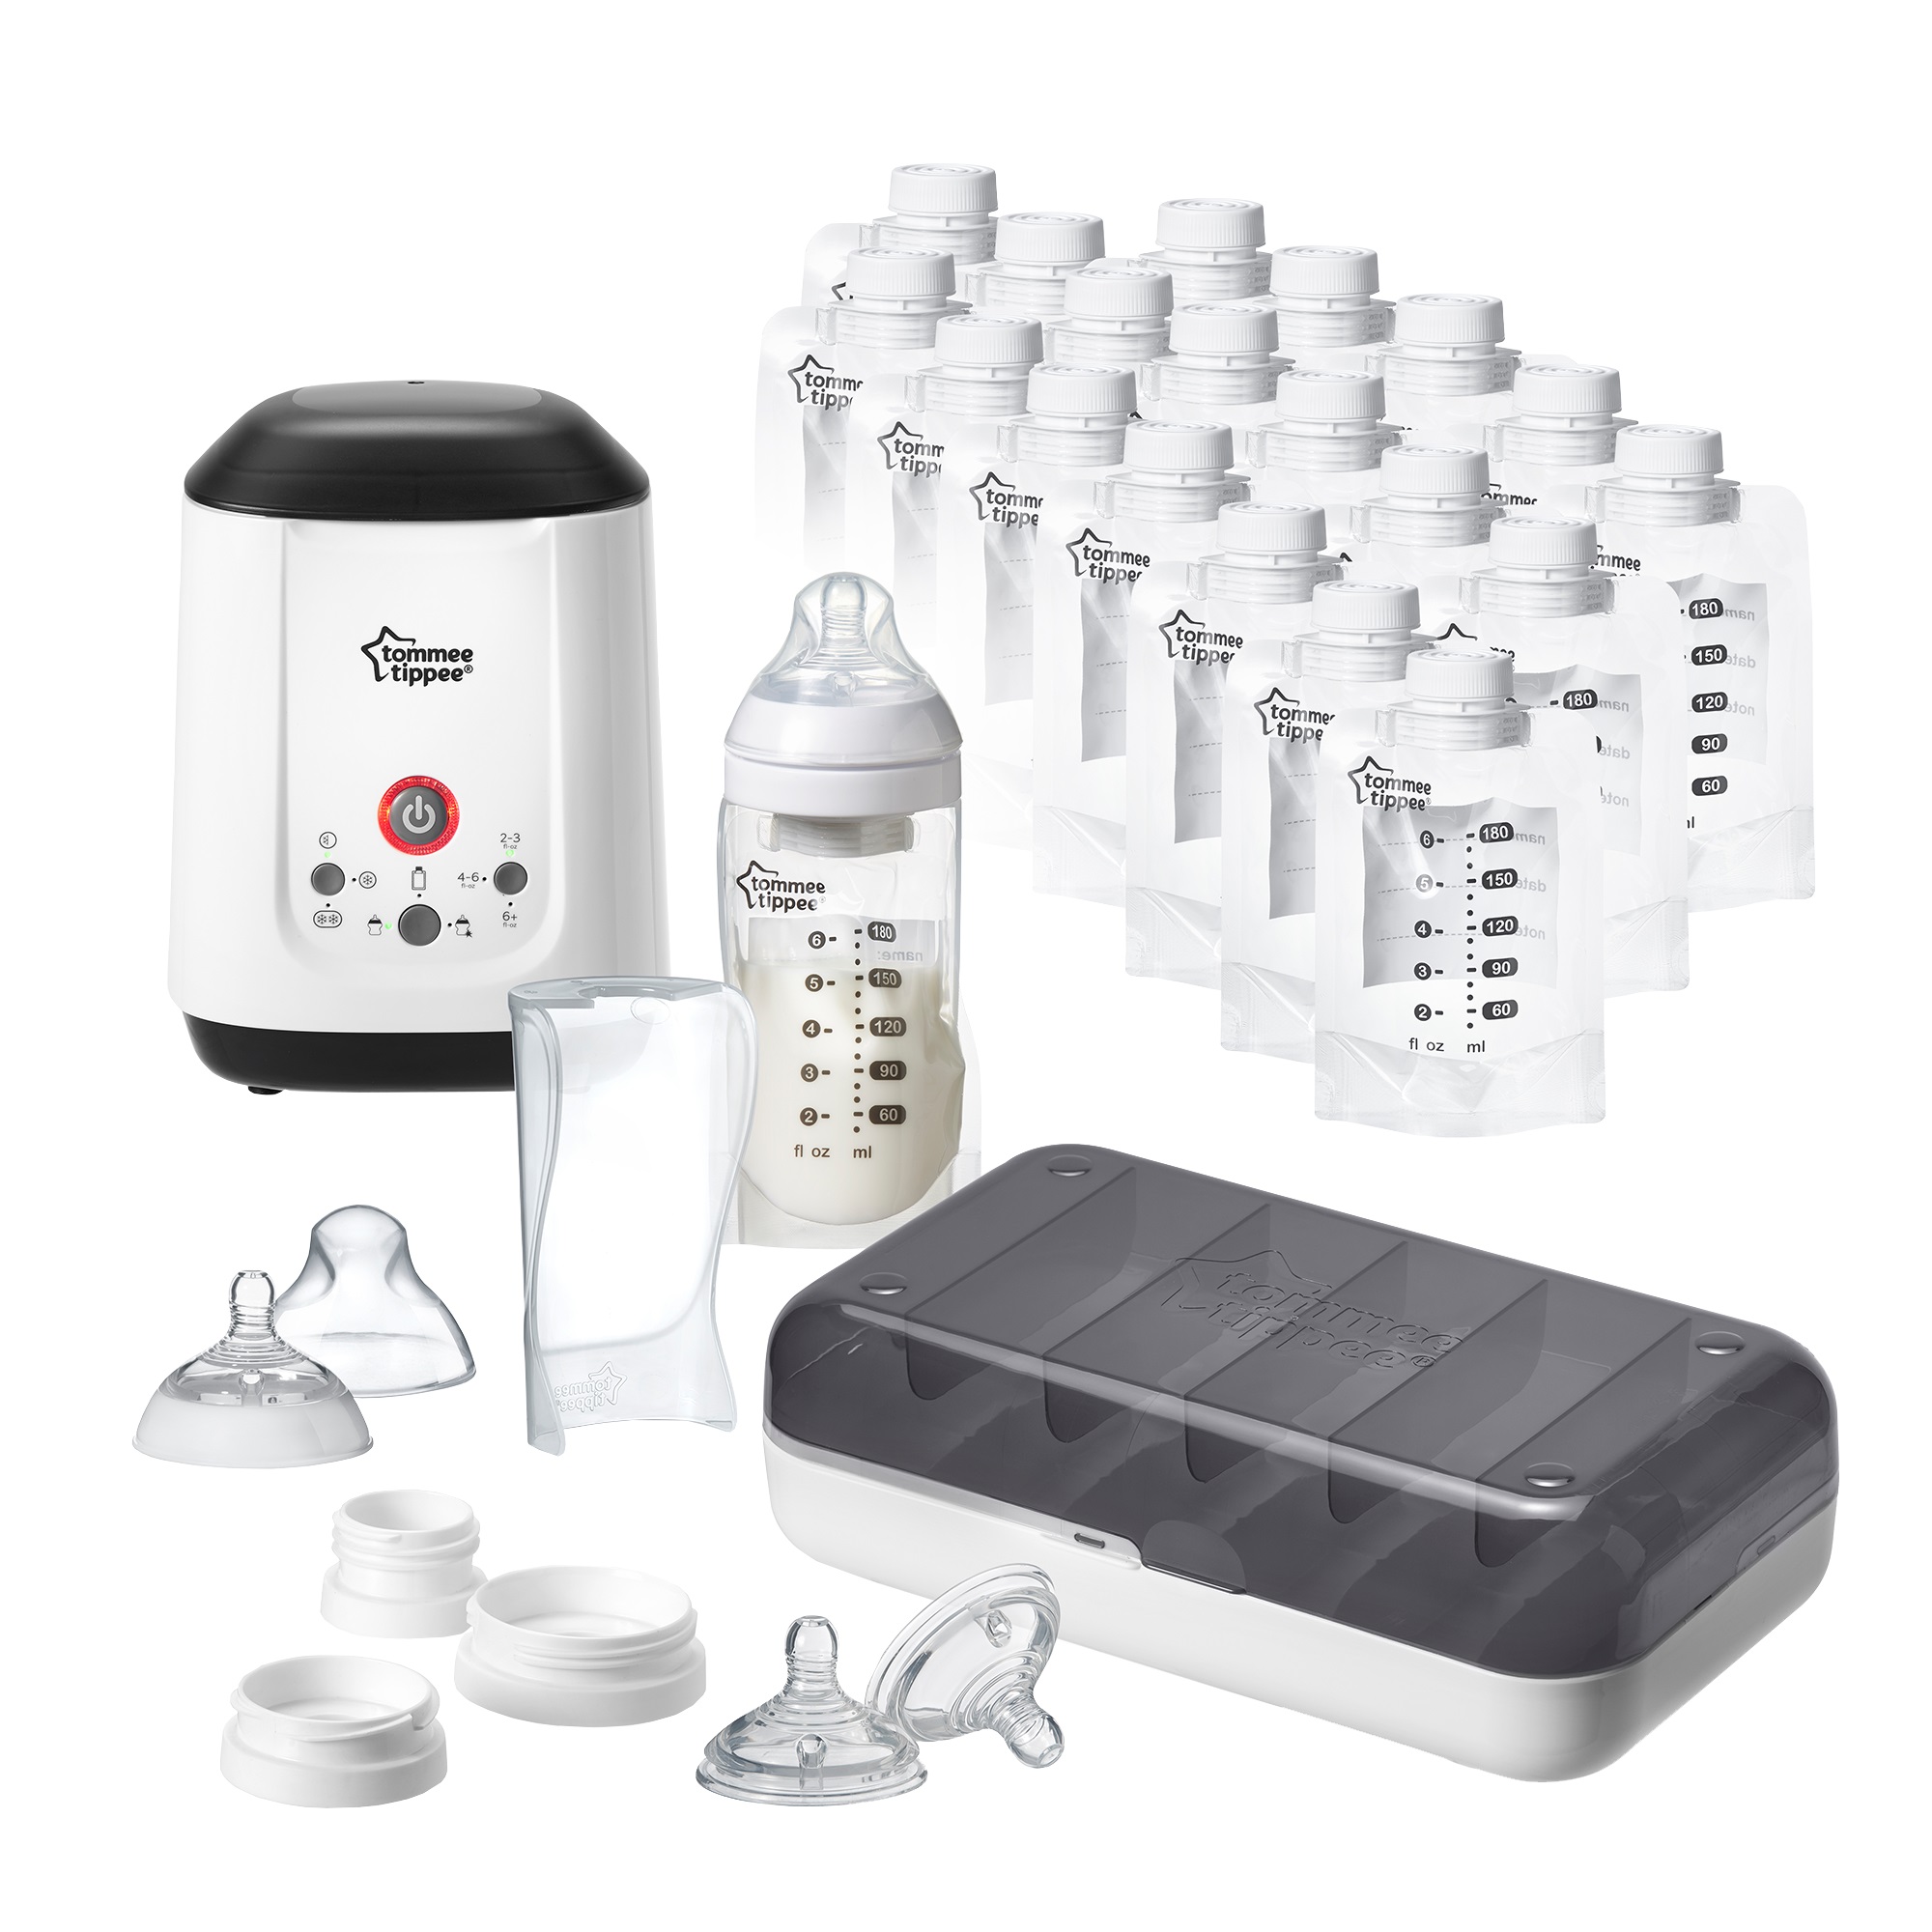 Tommee Tippee Express & Go Complete Breast Milk Starter Set